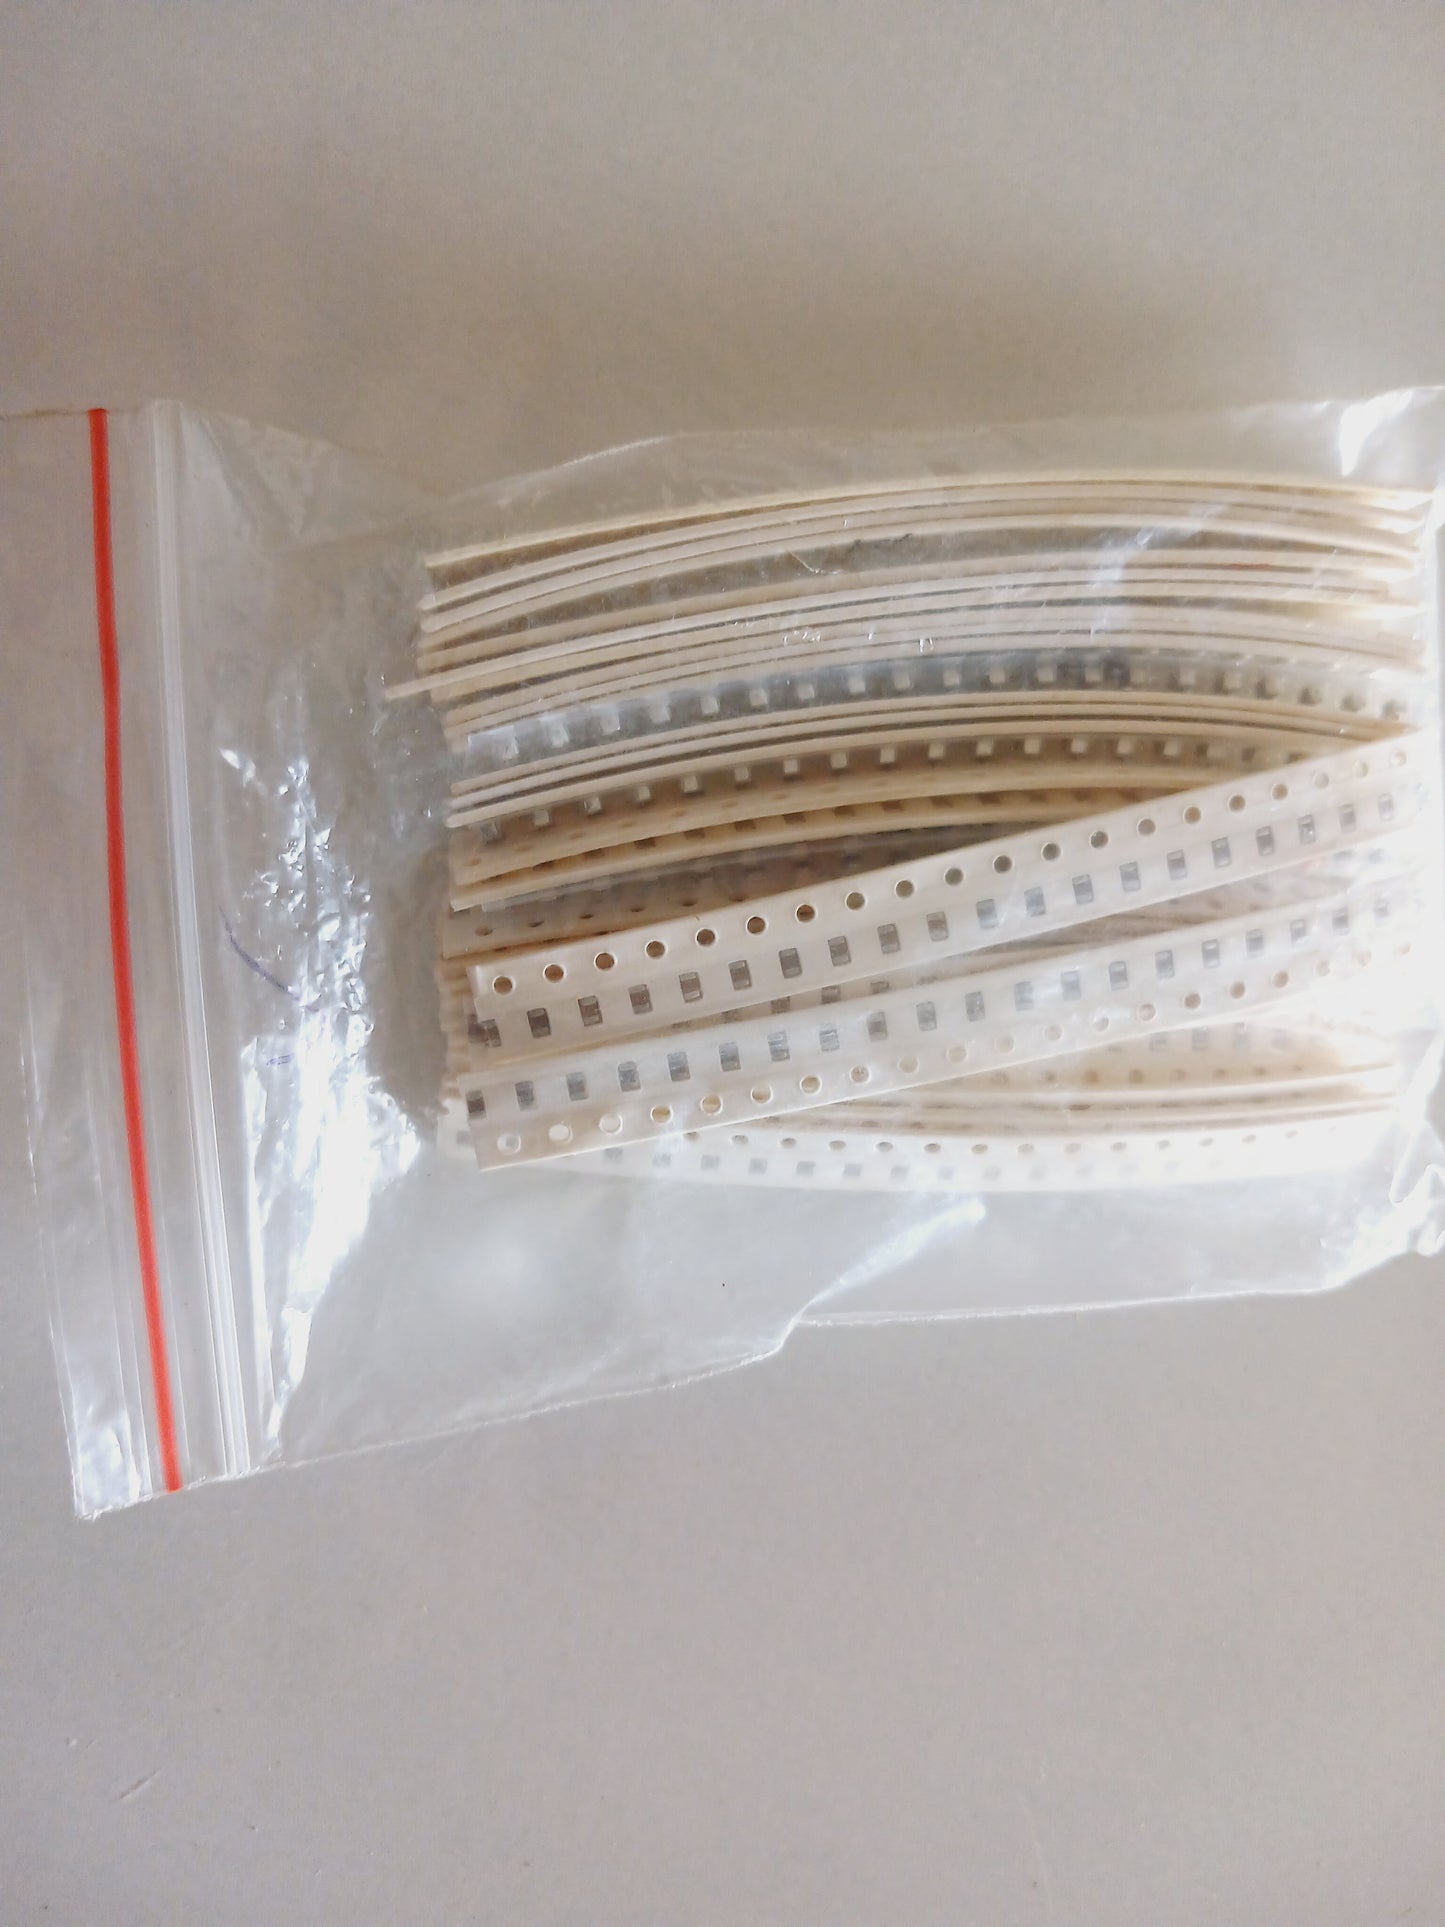 A pack of SMD ceramic capacitor 20pcs each (35values)